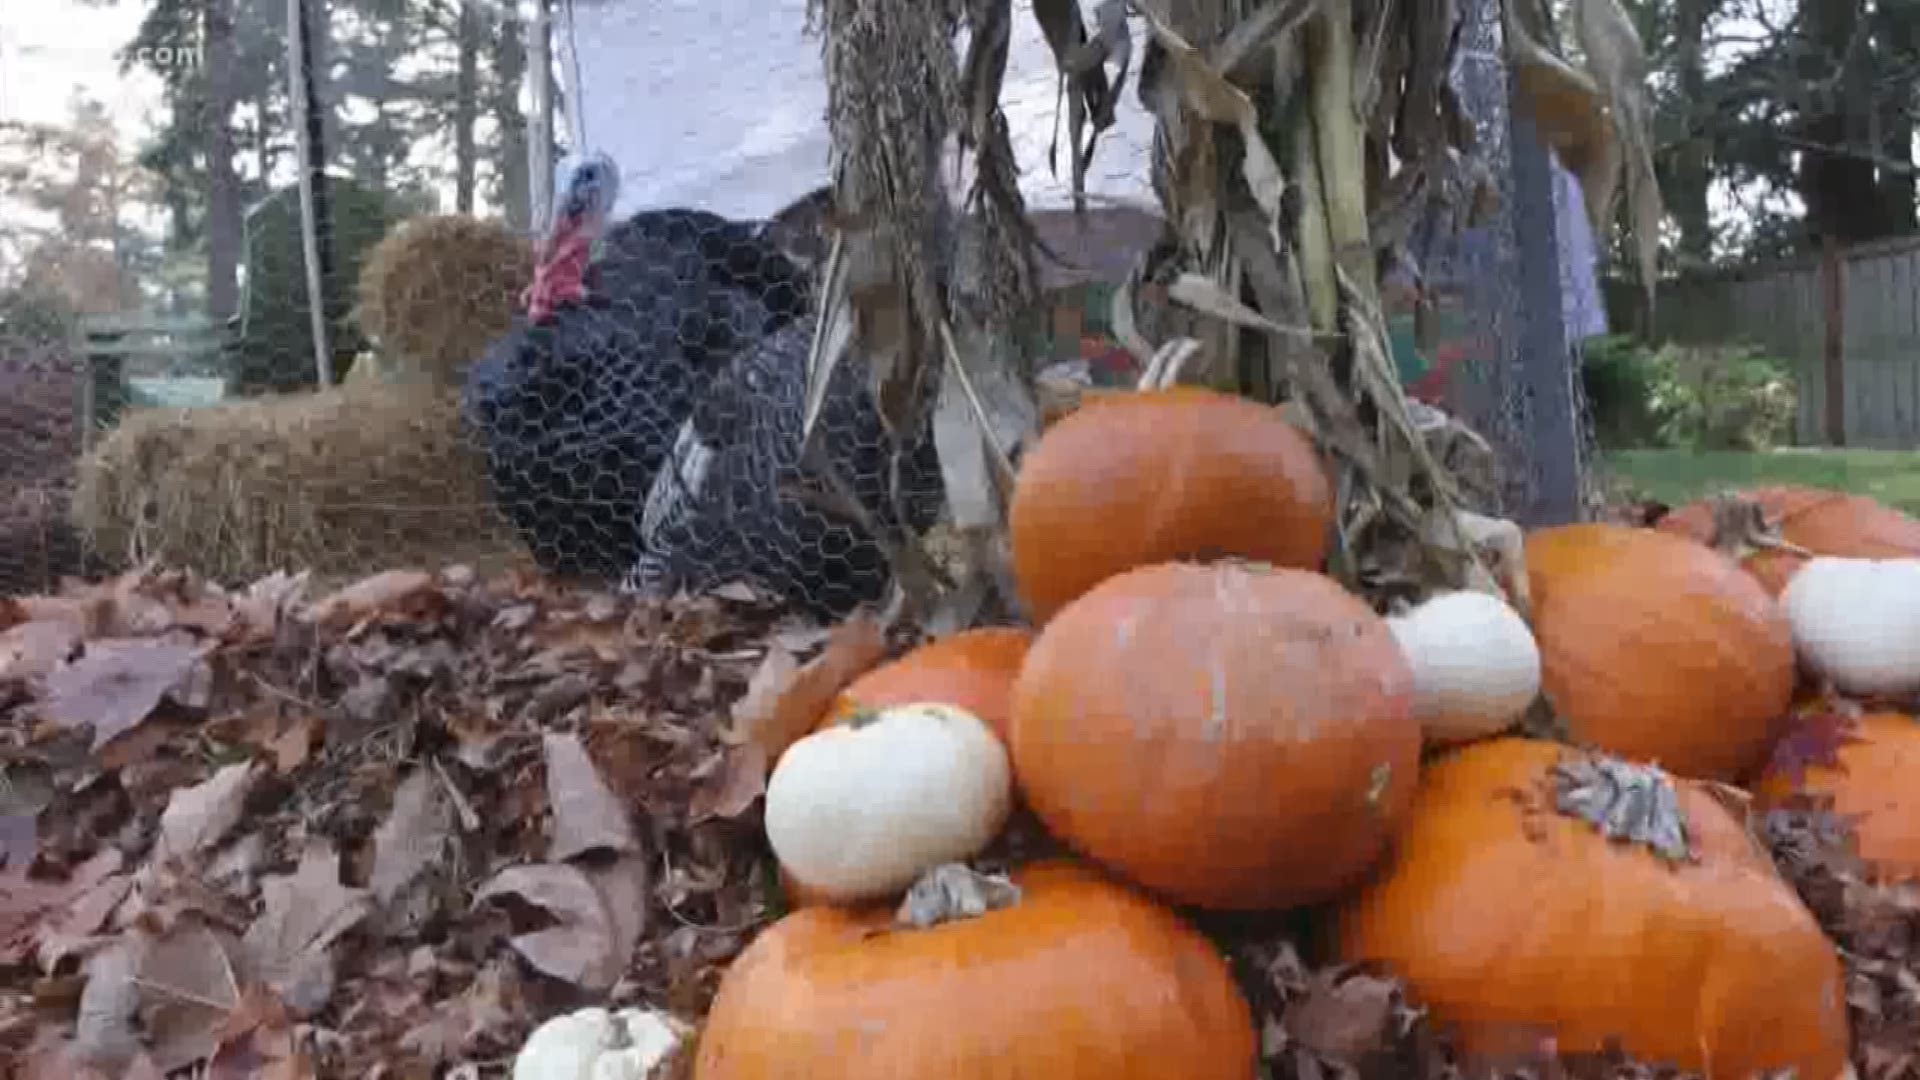 Community members have decided to pardon the turkeys.